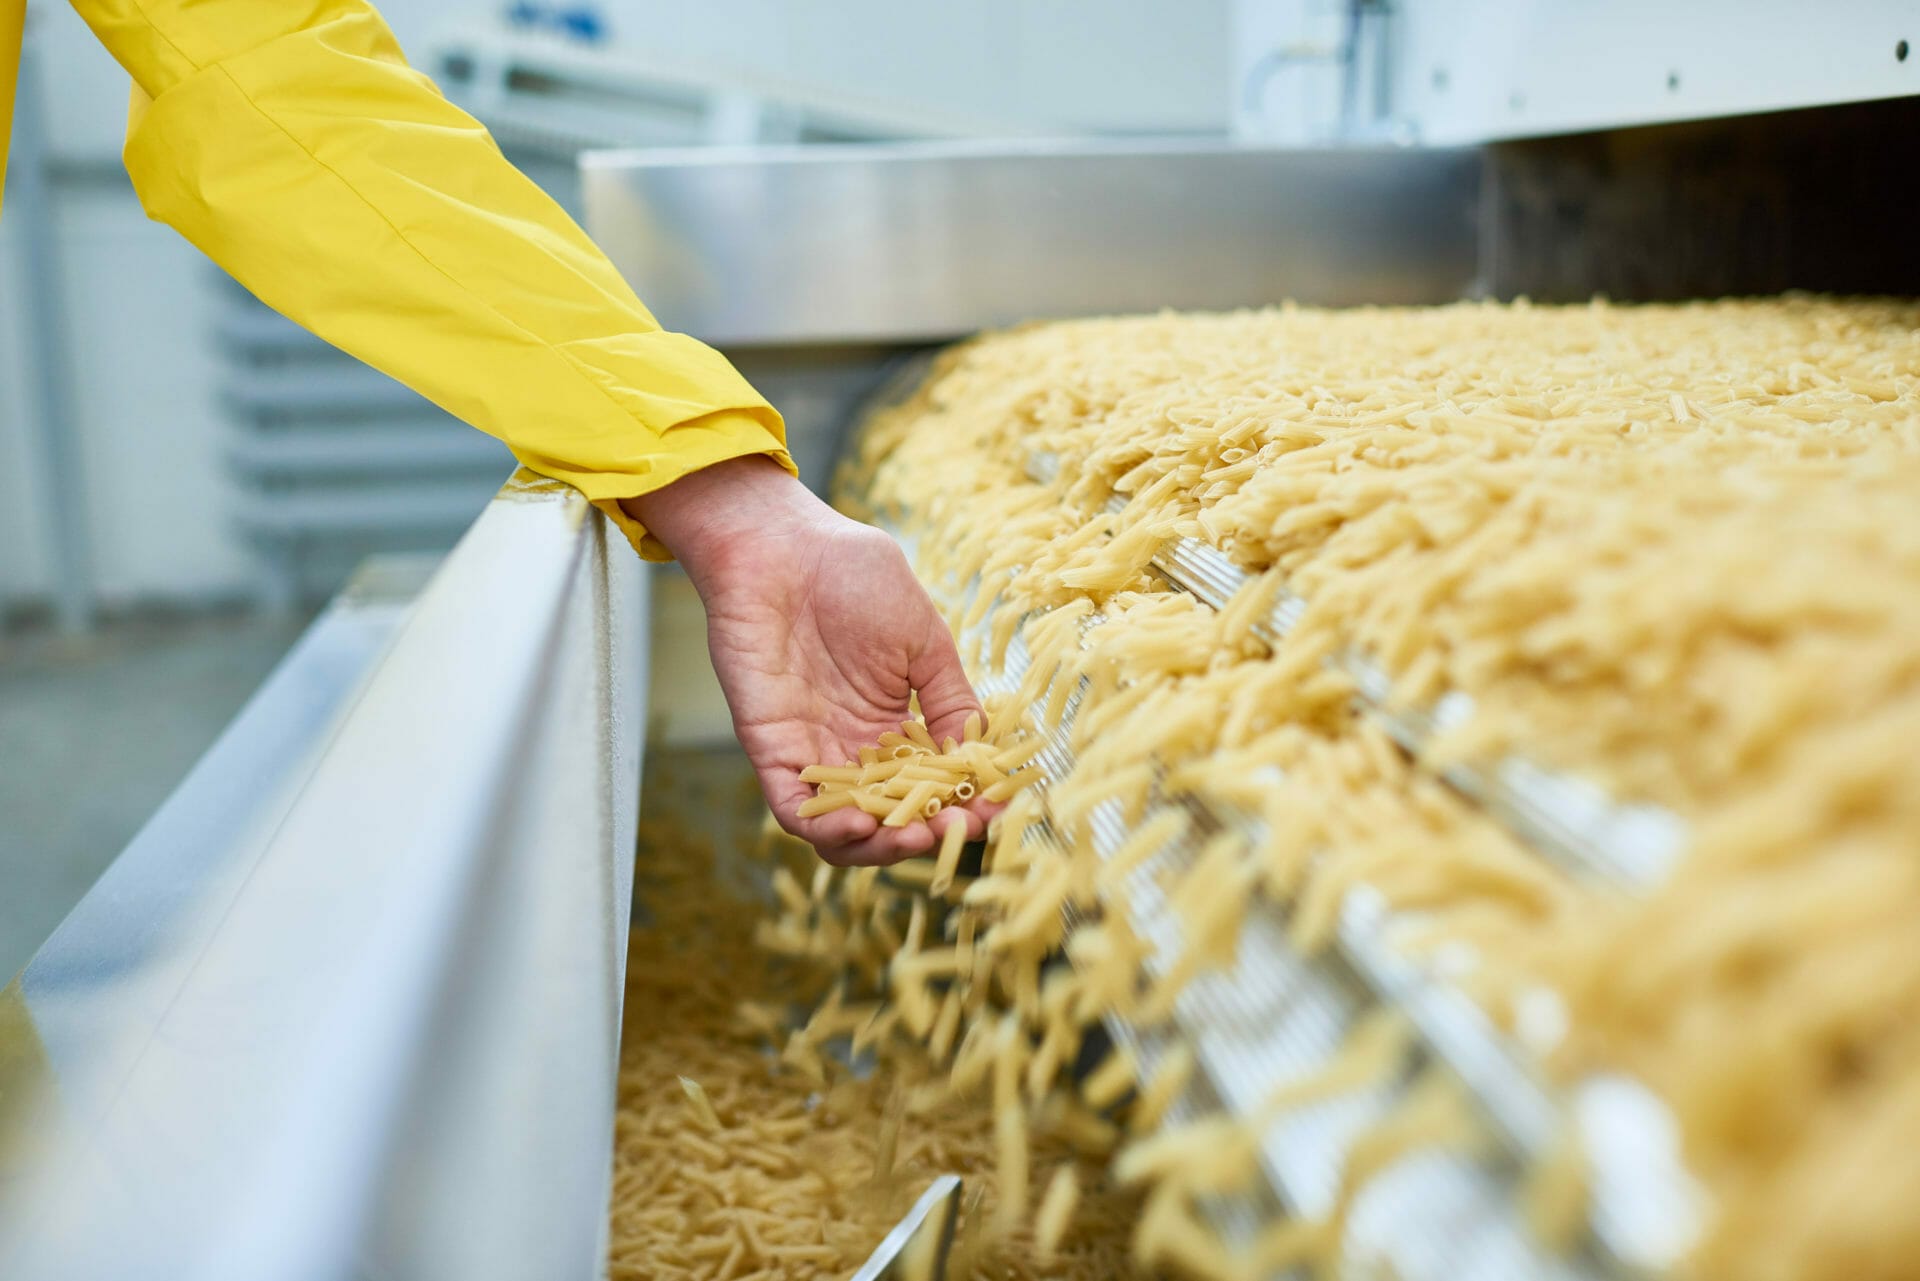 Spilling Macaroni in food processing factory